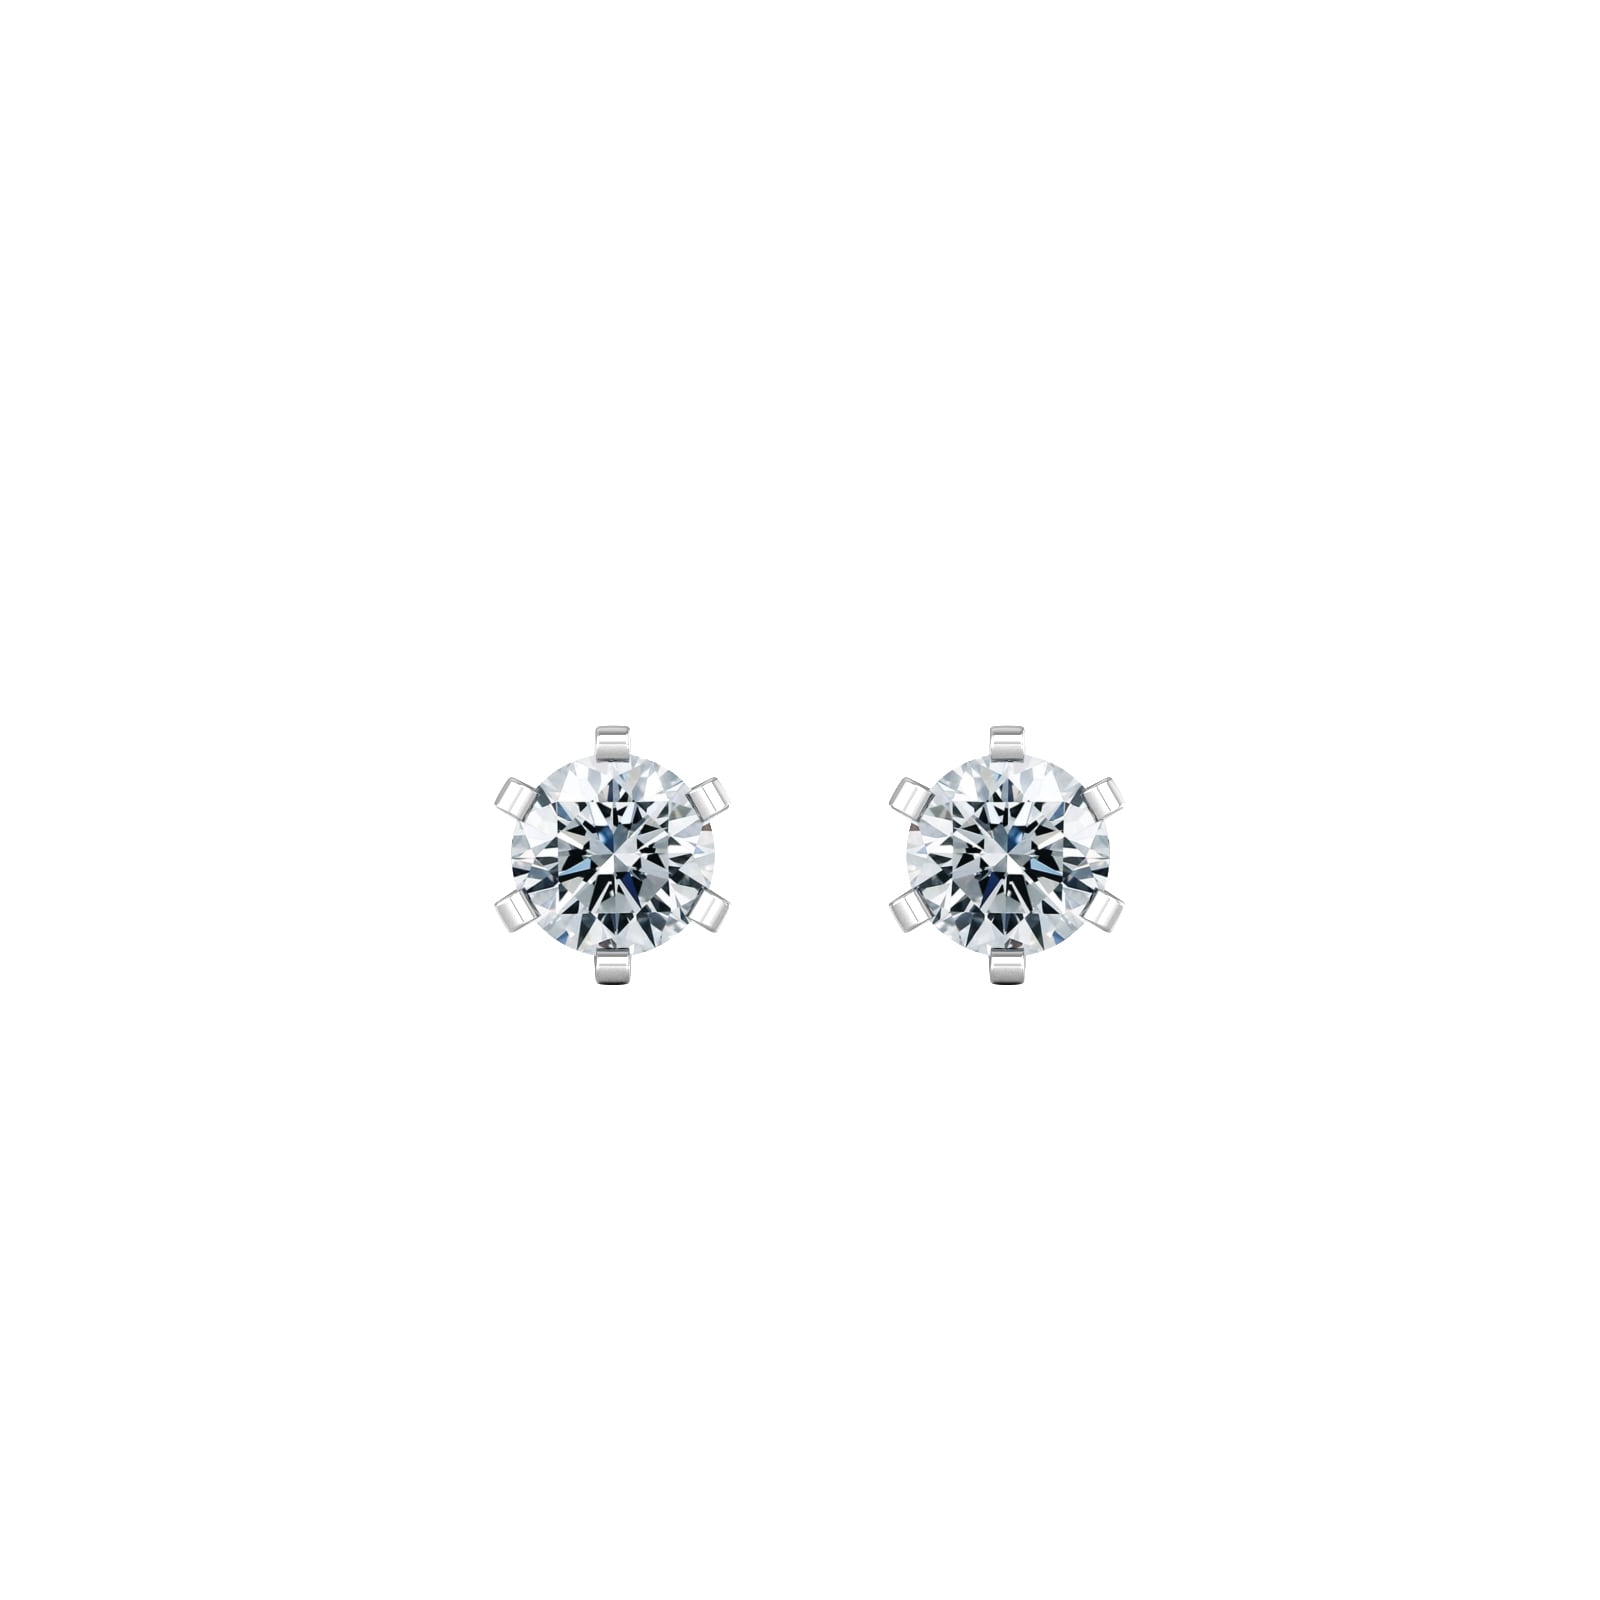 18ct White Gold 0.33cttw Solitaire Diamond Stud Earrings